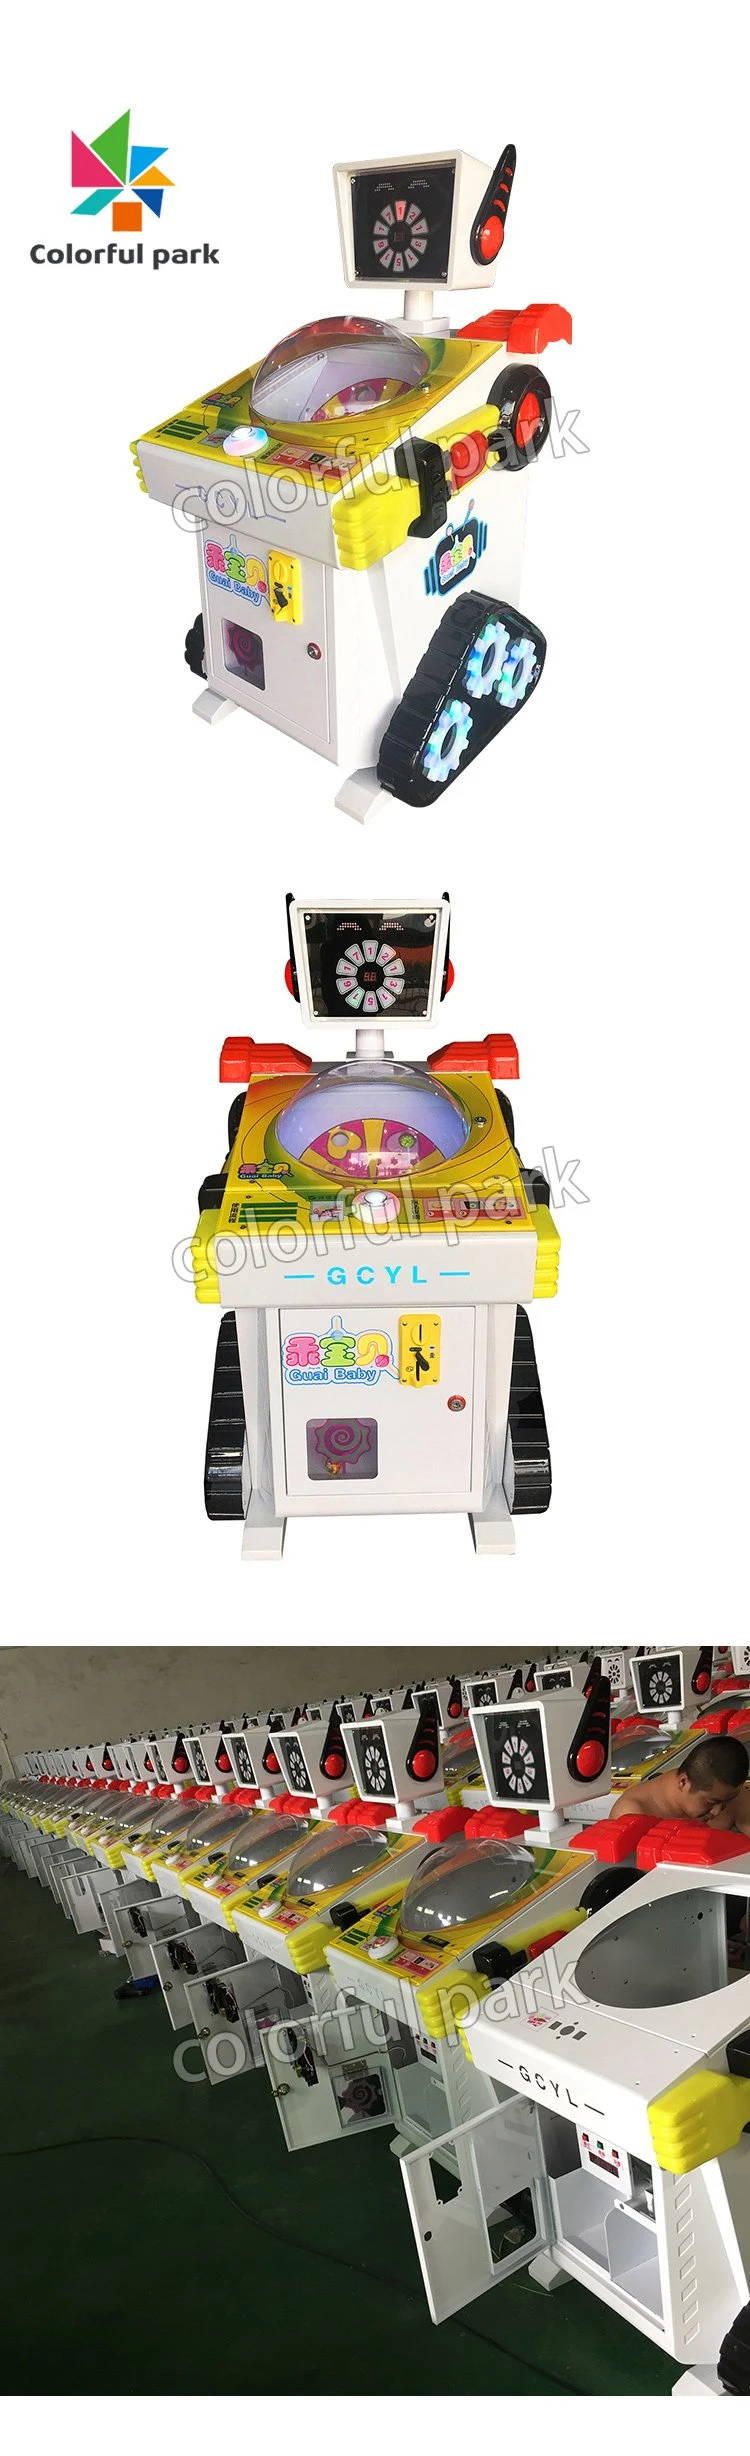 Colorful Park Maximum Tune Arcade Game Machine Catch Candy Arcade Game Machine for Shopping Mall